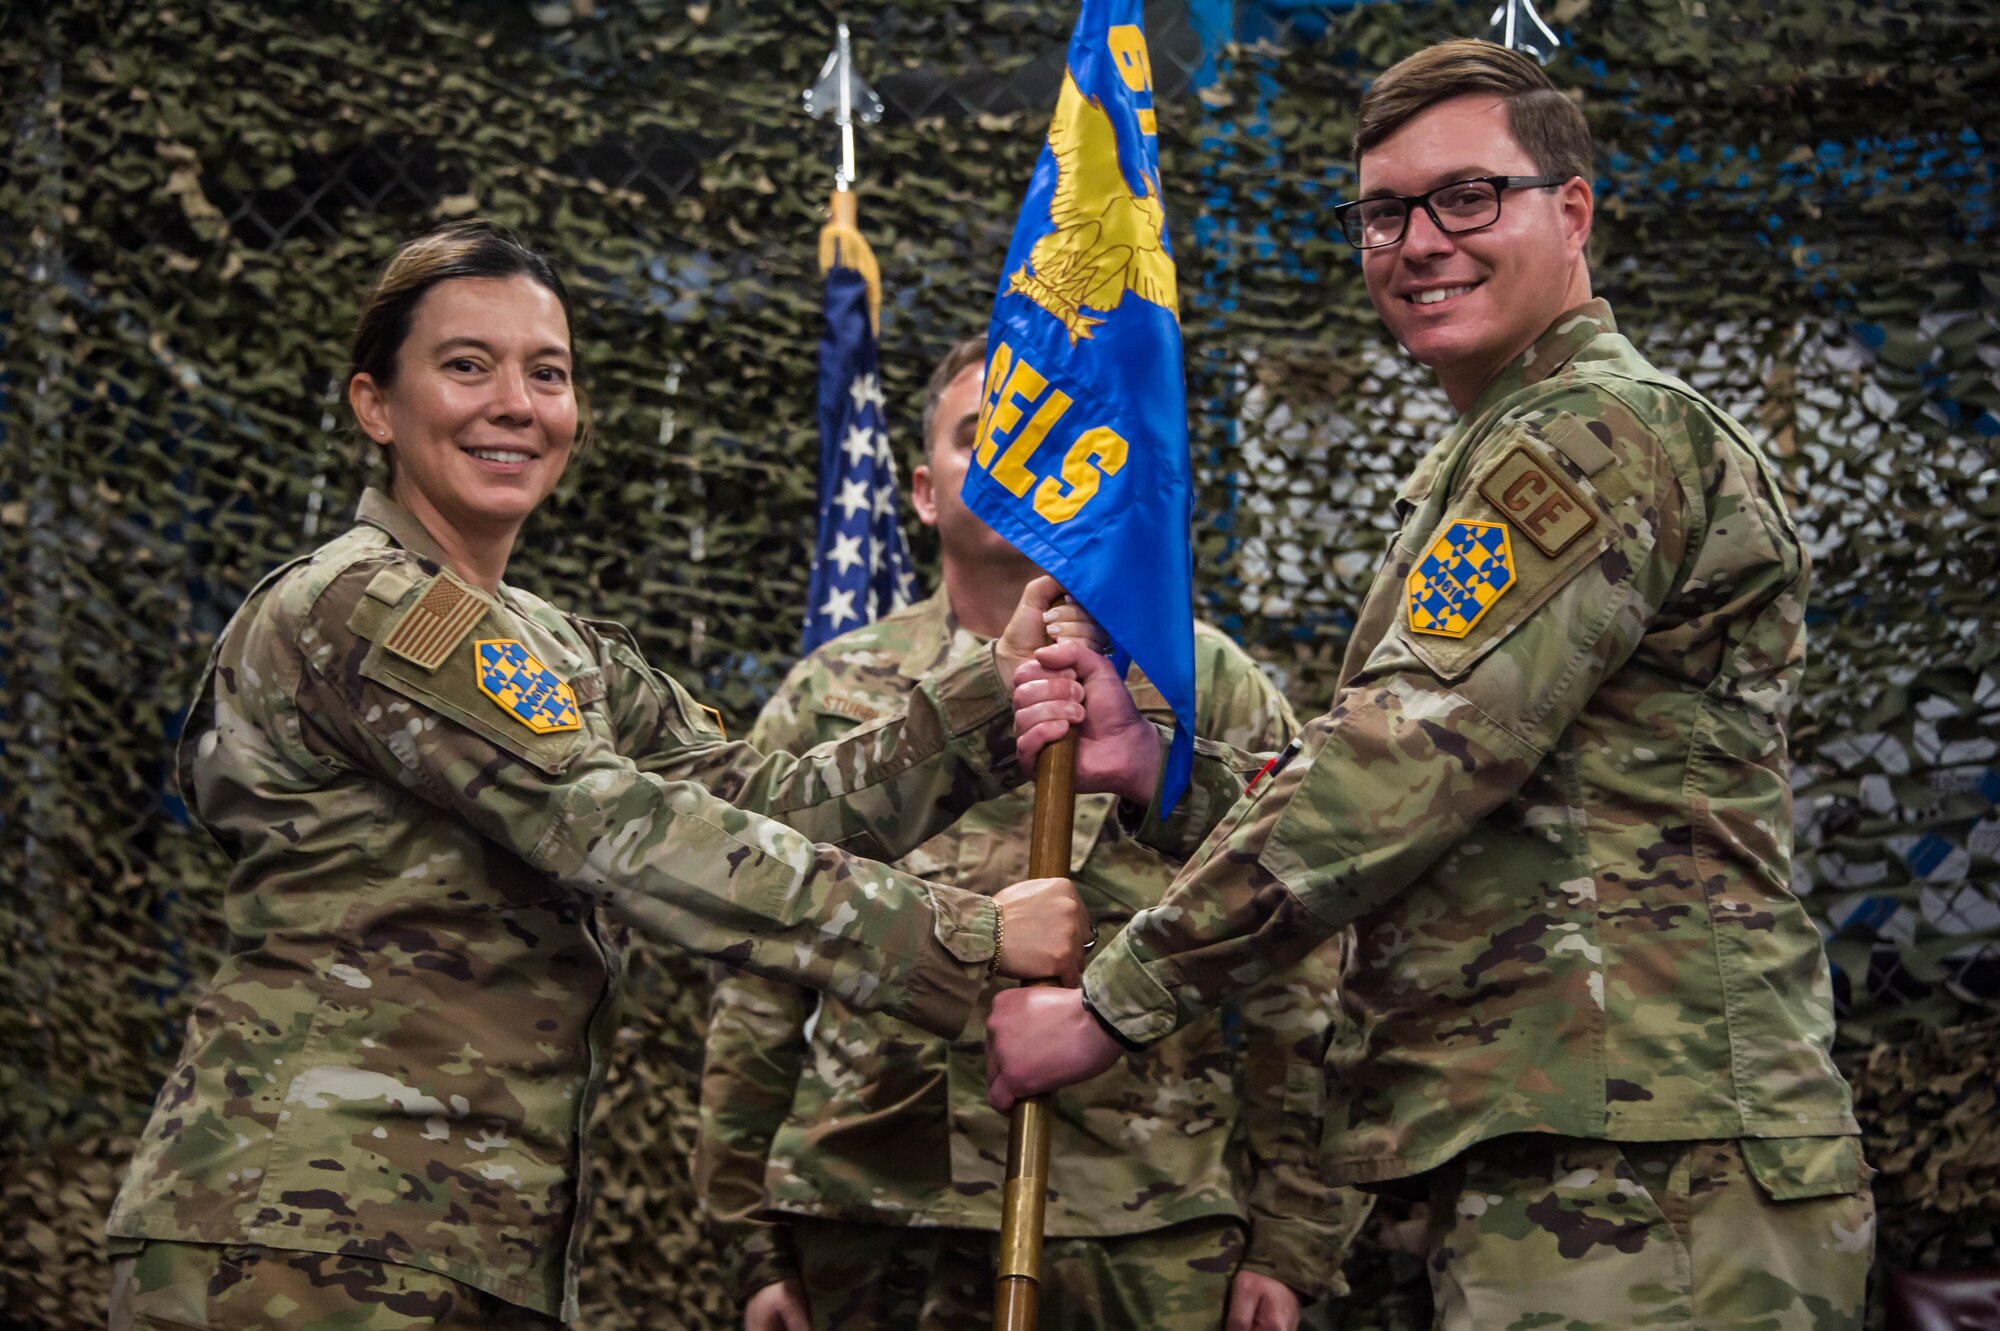 Col. Becky Beers, Los Angeles Garrison commander, left, turns over the 61st CELS command guidon to Lt. Col. Ryan Oot, new 61st CELS commander, right at his change of command ceremony which was held in their warehouse on Monday.